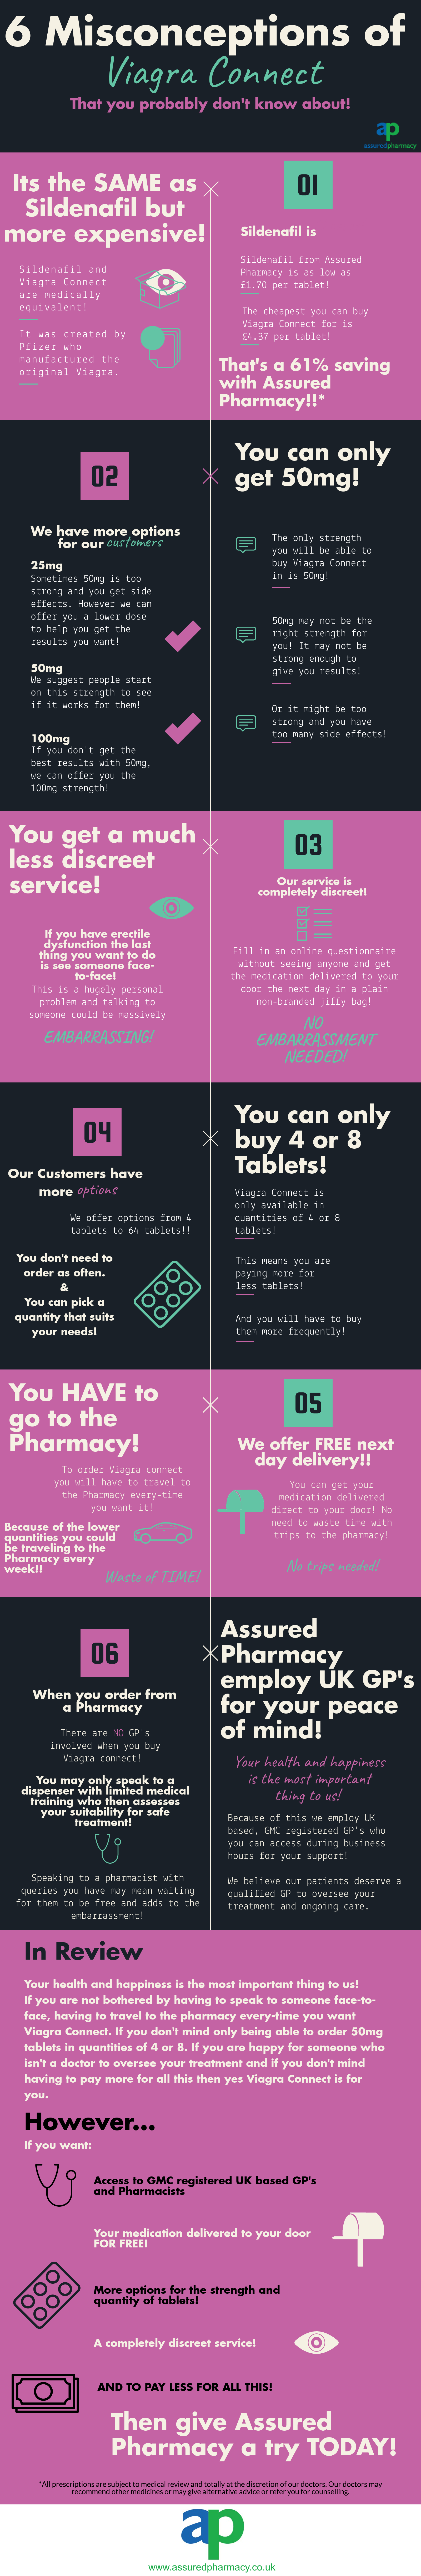 Infographic - 6 Misconceptions of Viagra Connect